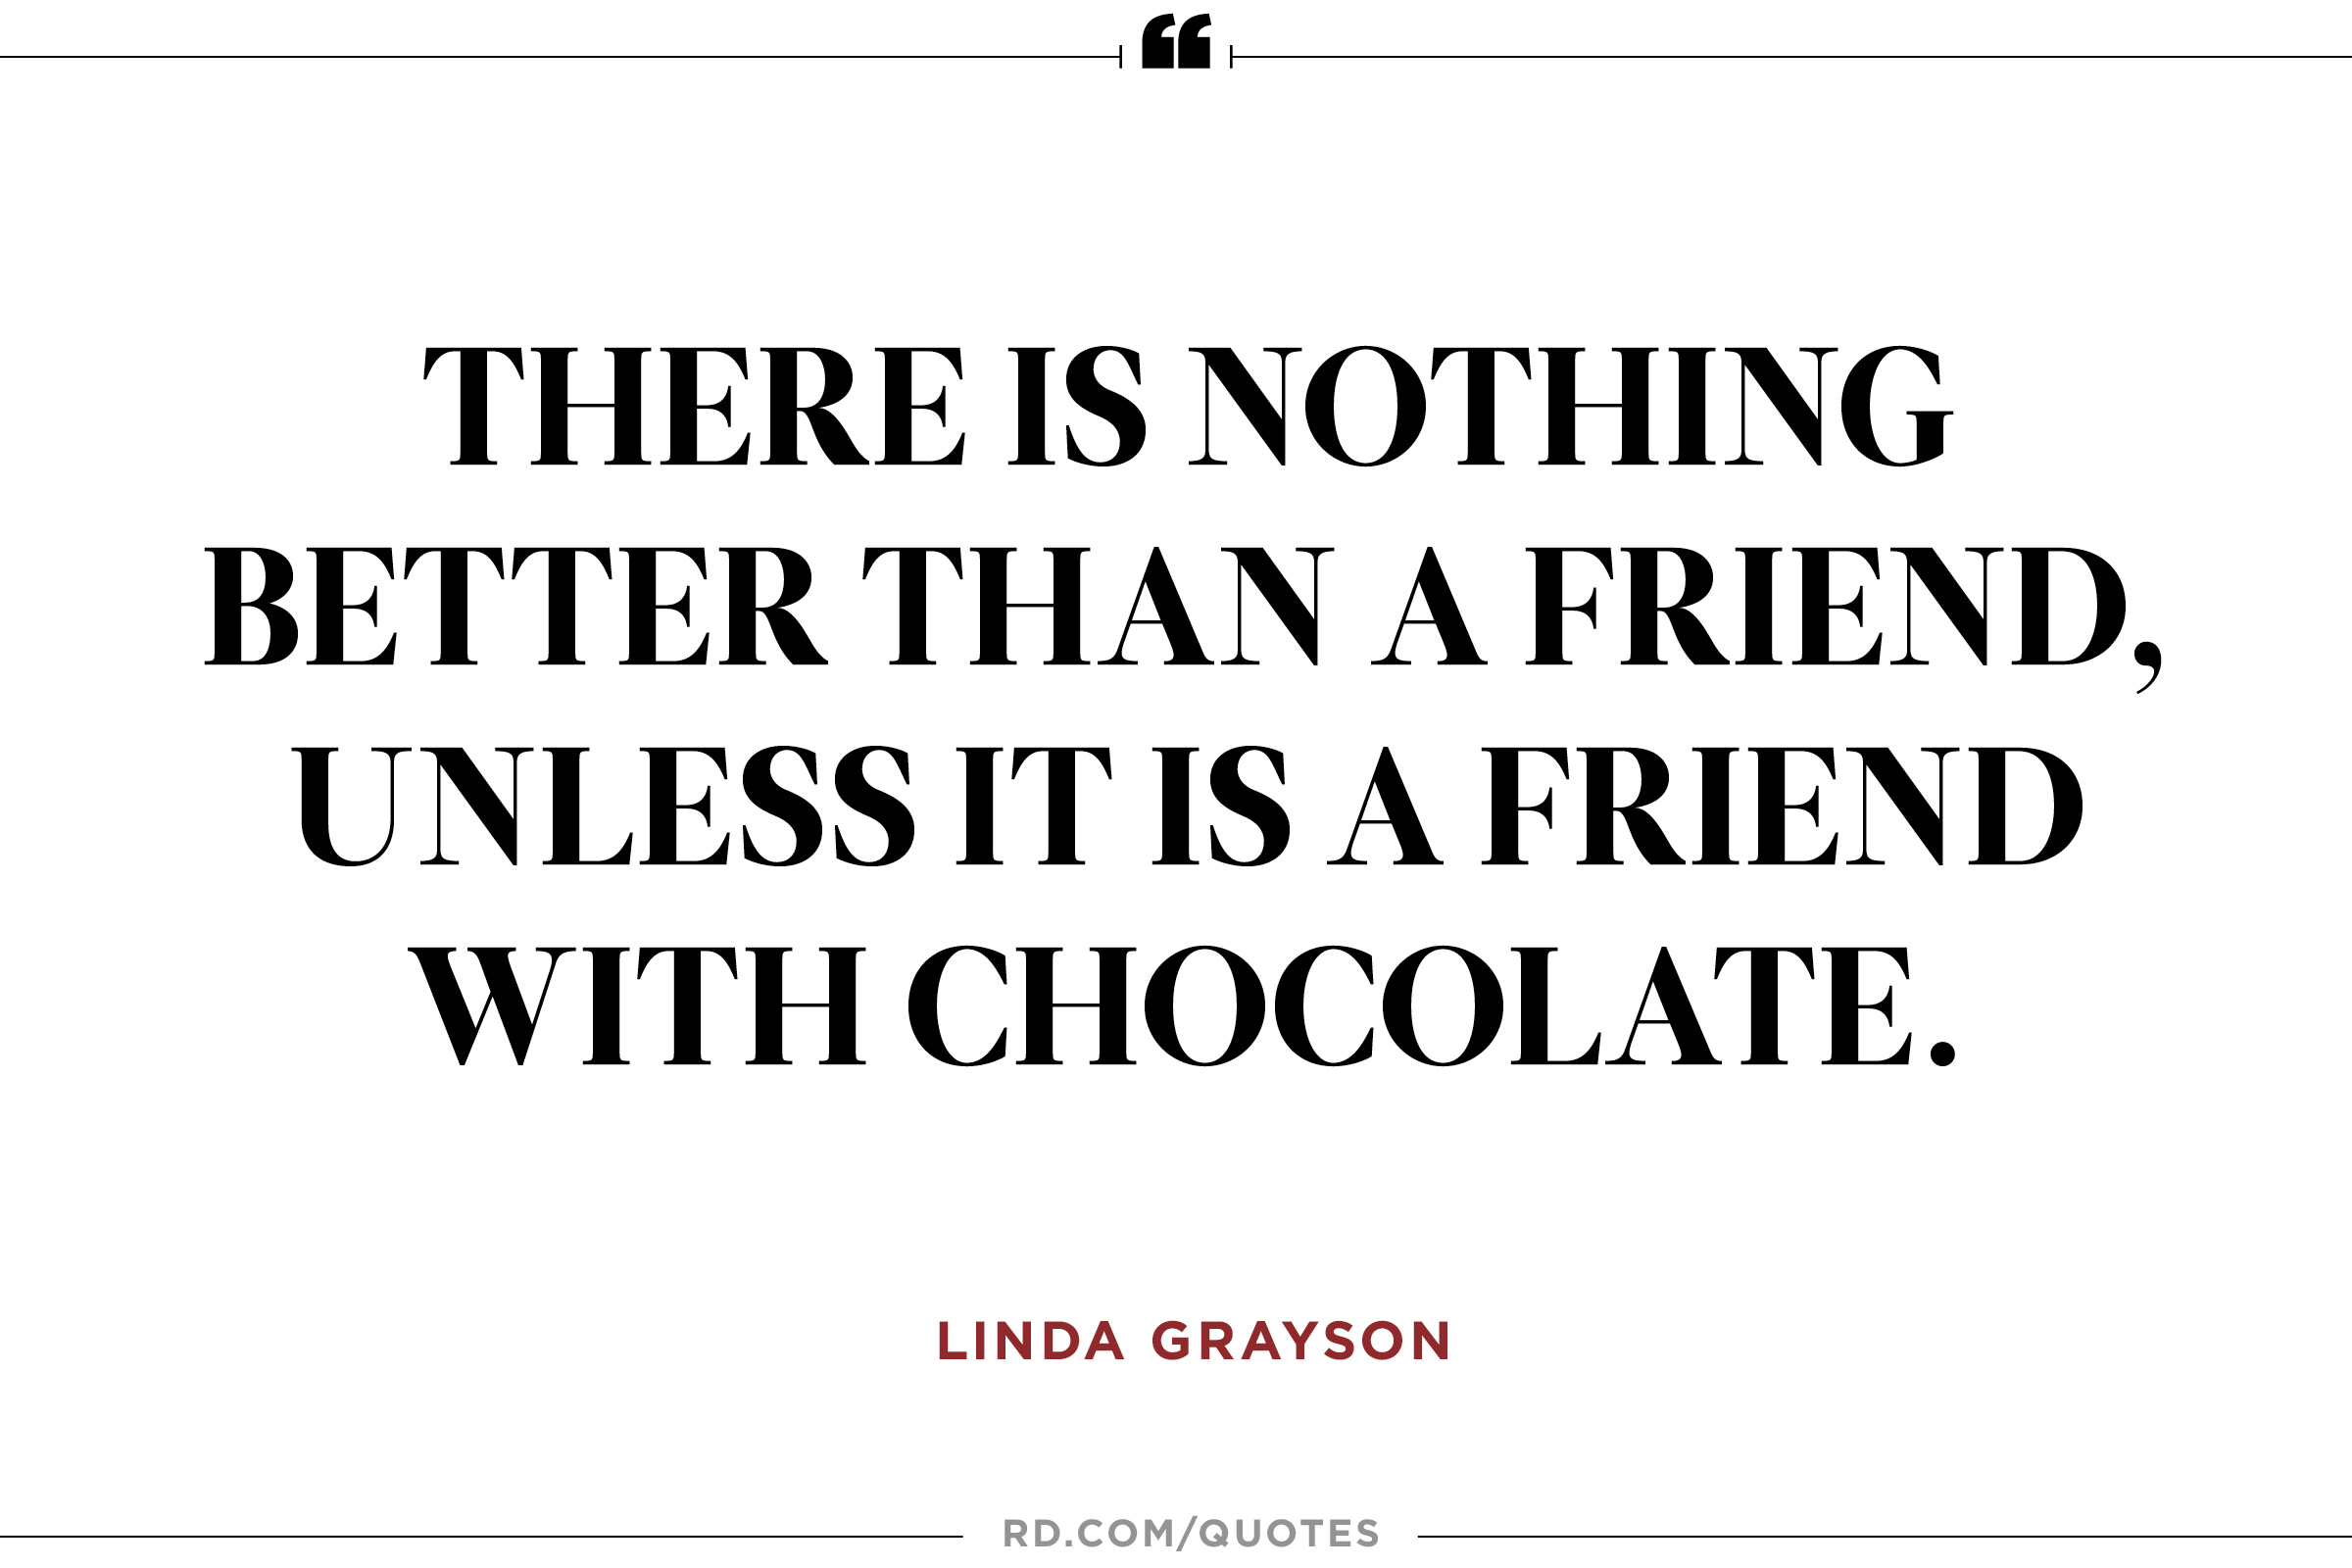 There is nothing better than a friend, unless it is a friend with chocolate. Linda Grayson